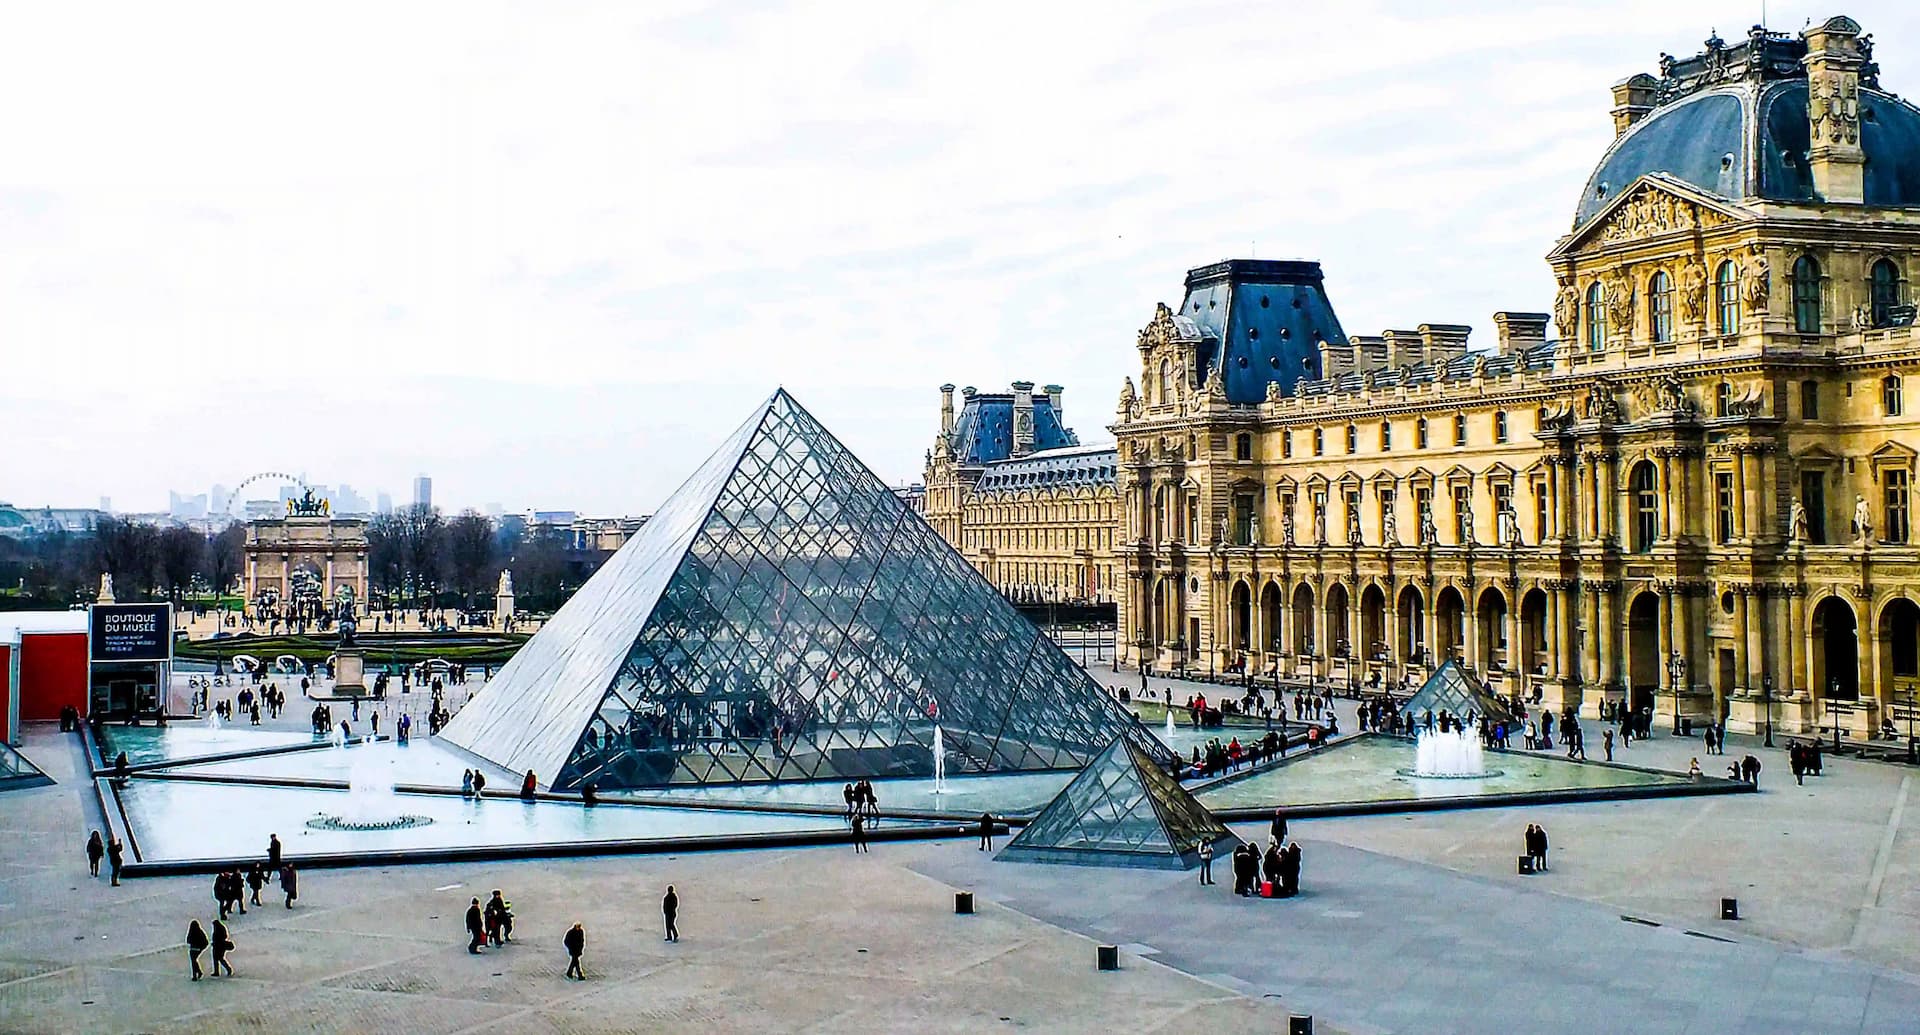 A view of the Louvre museum courtyard